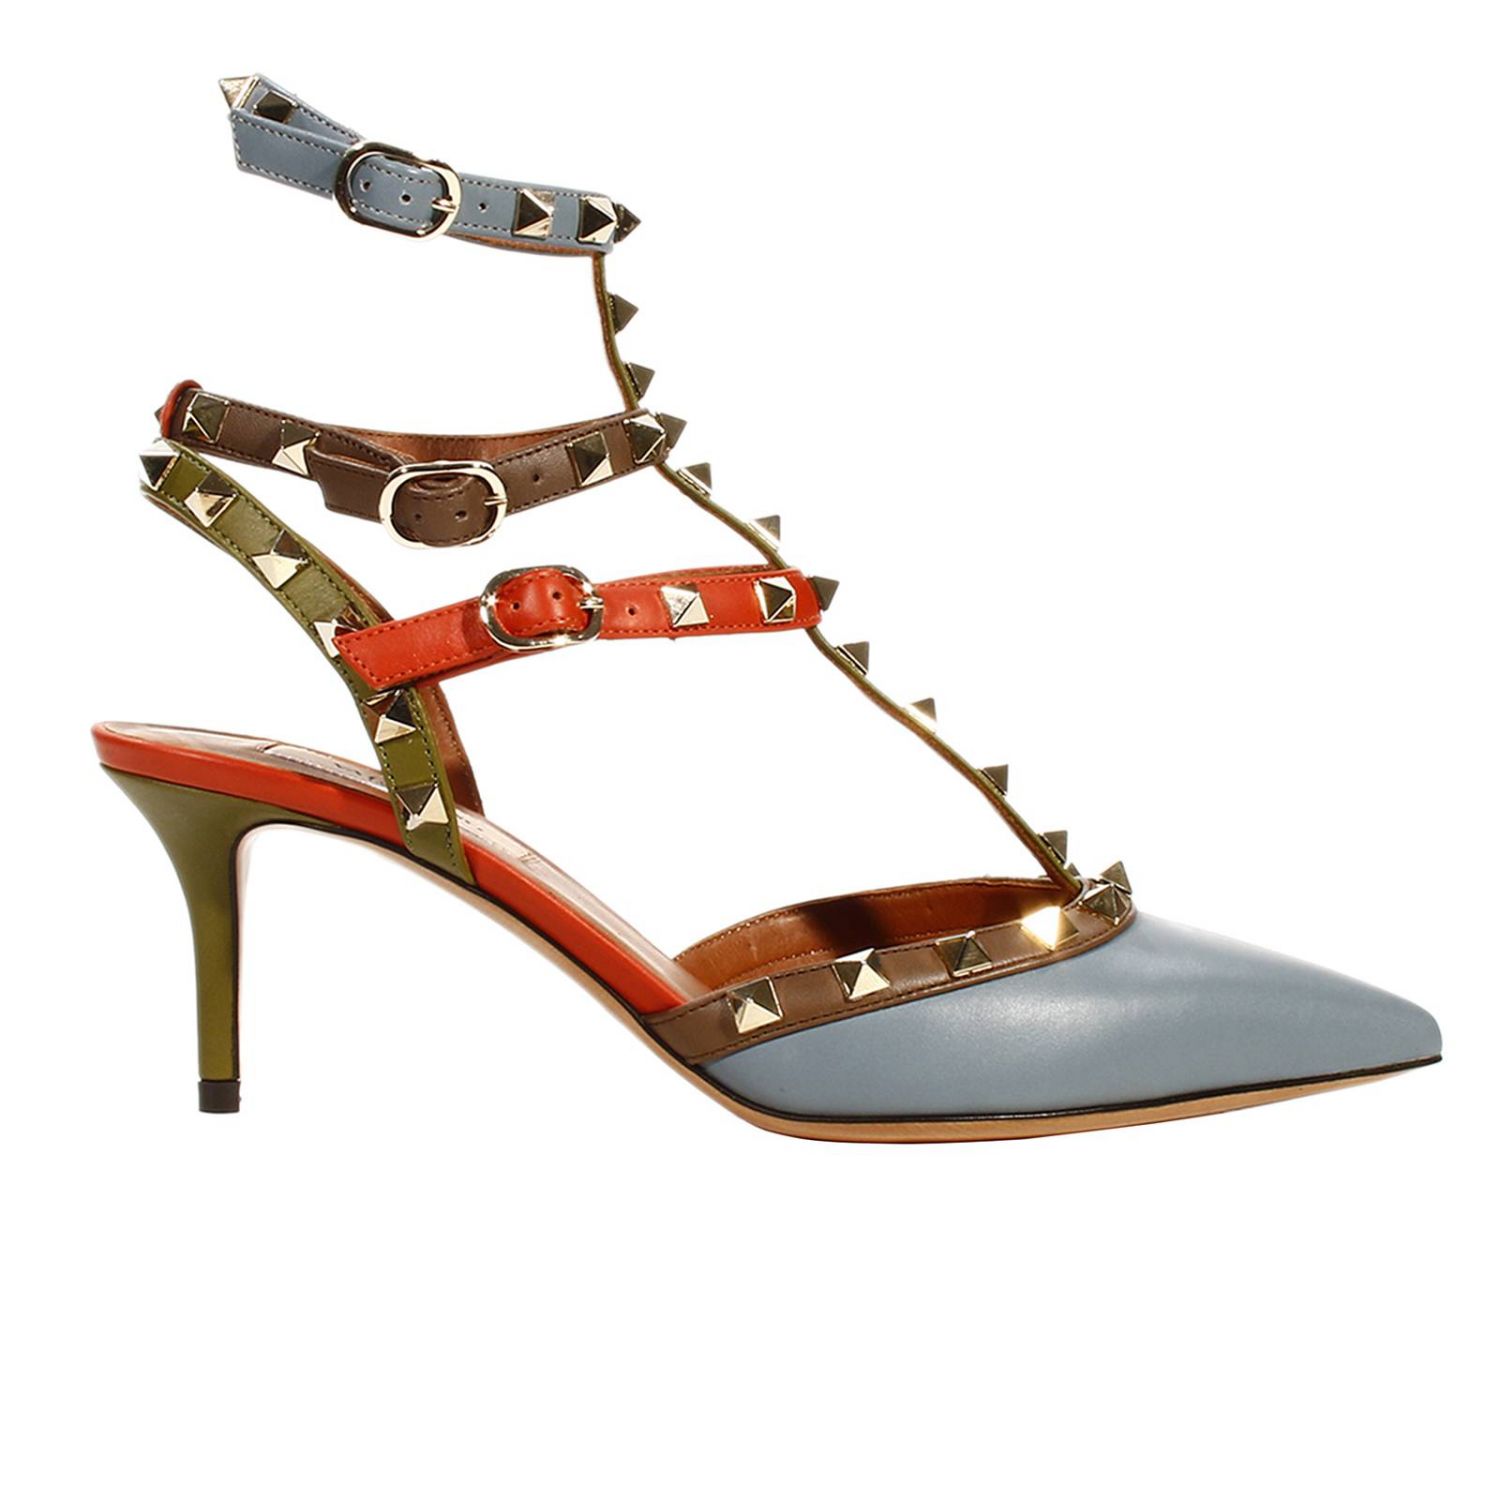 Valentino Garavani Outlet: 5,5 HELL ROCKSTUD LEATHER MULTICOLOR WITH ...